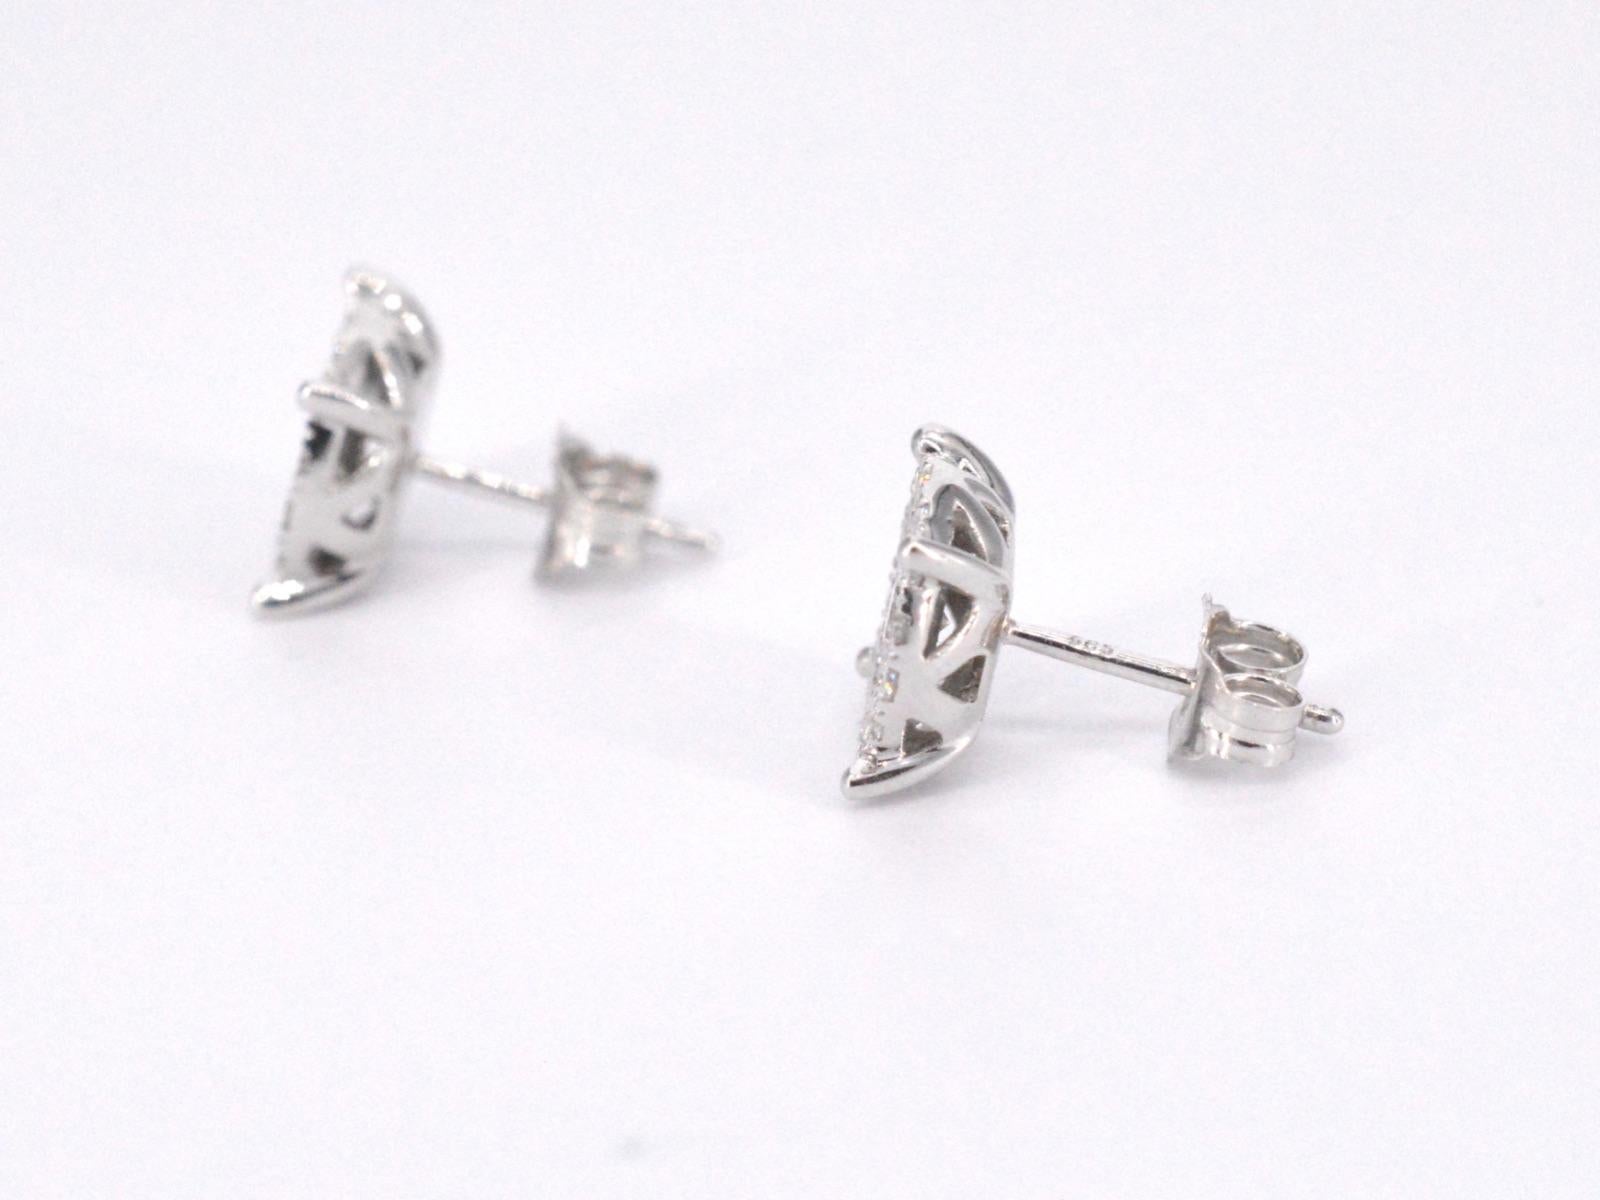 White Gold Earrings with a Brilliant Cut Diamond For Sale 2